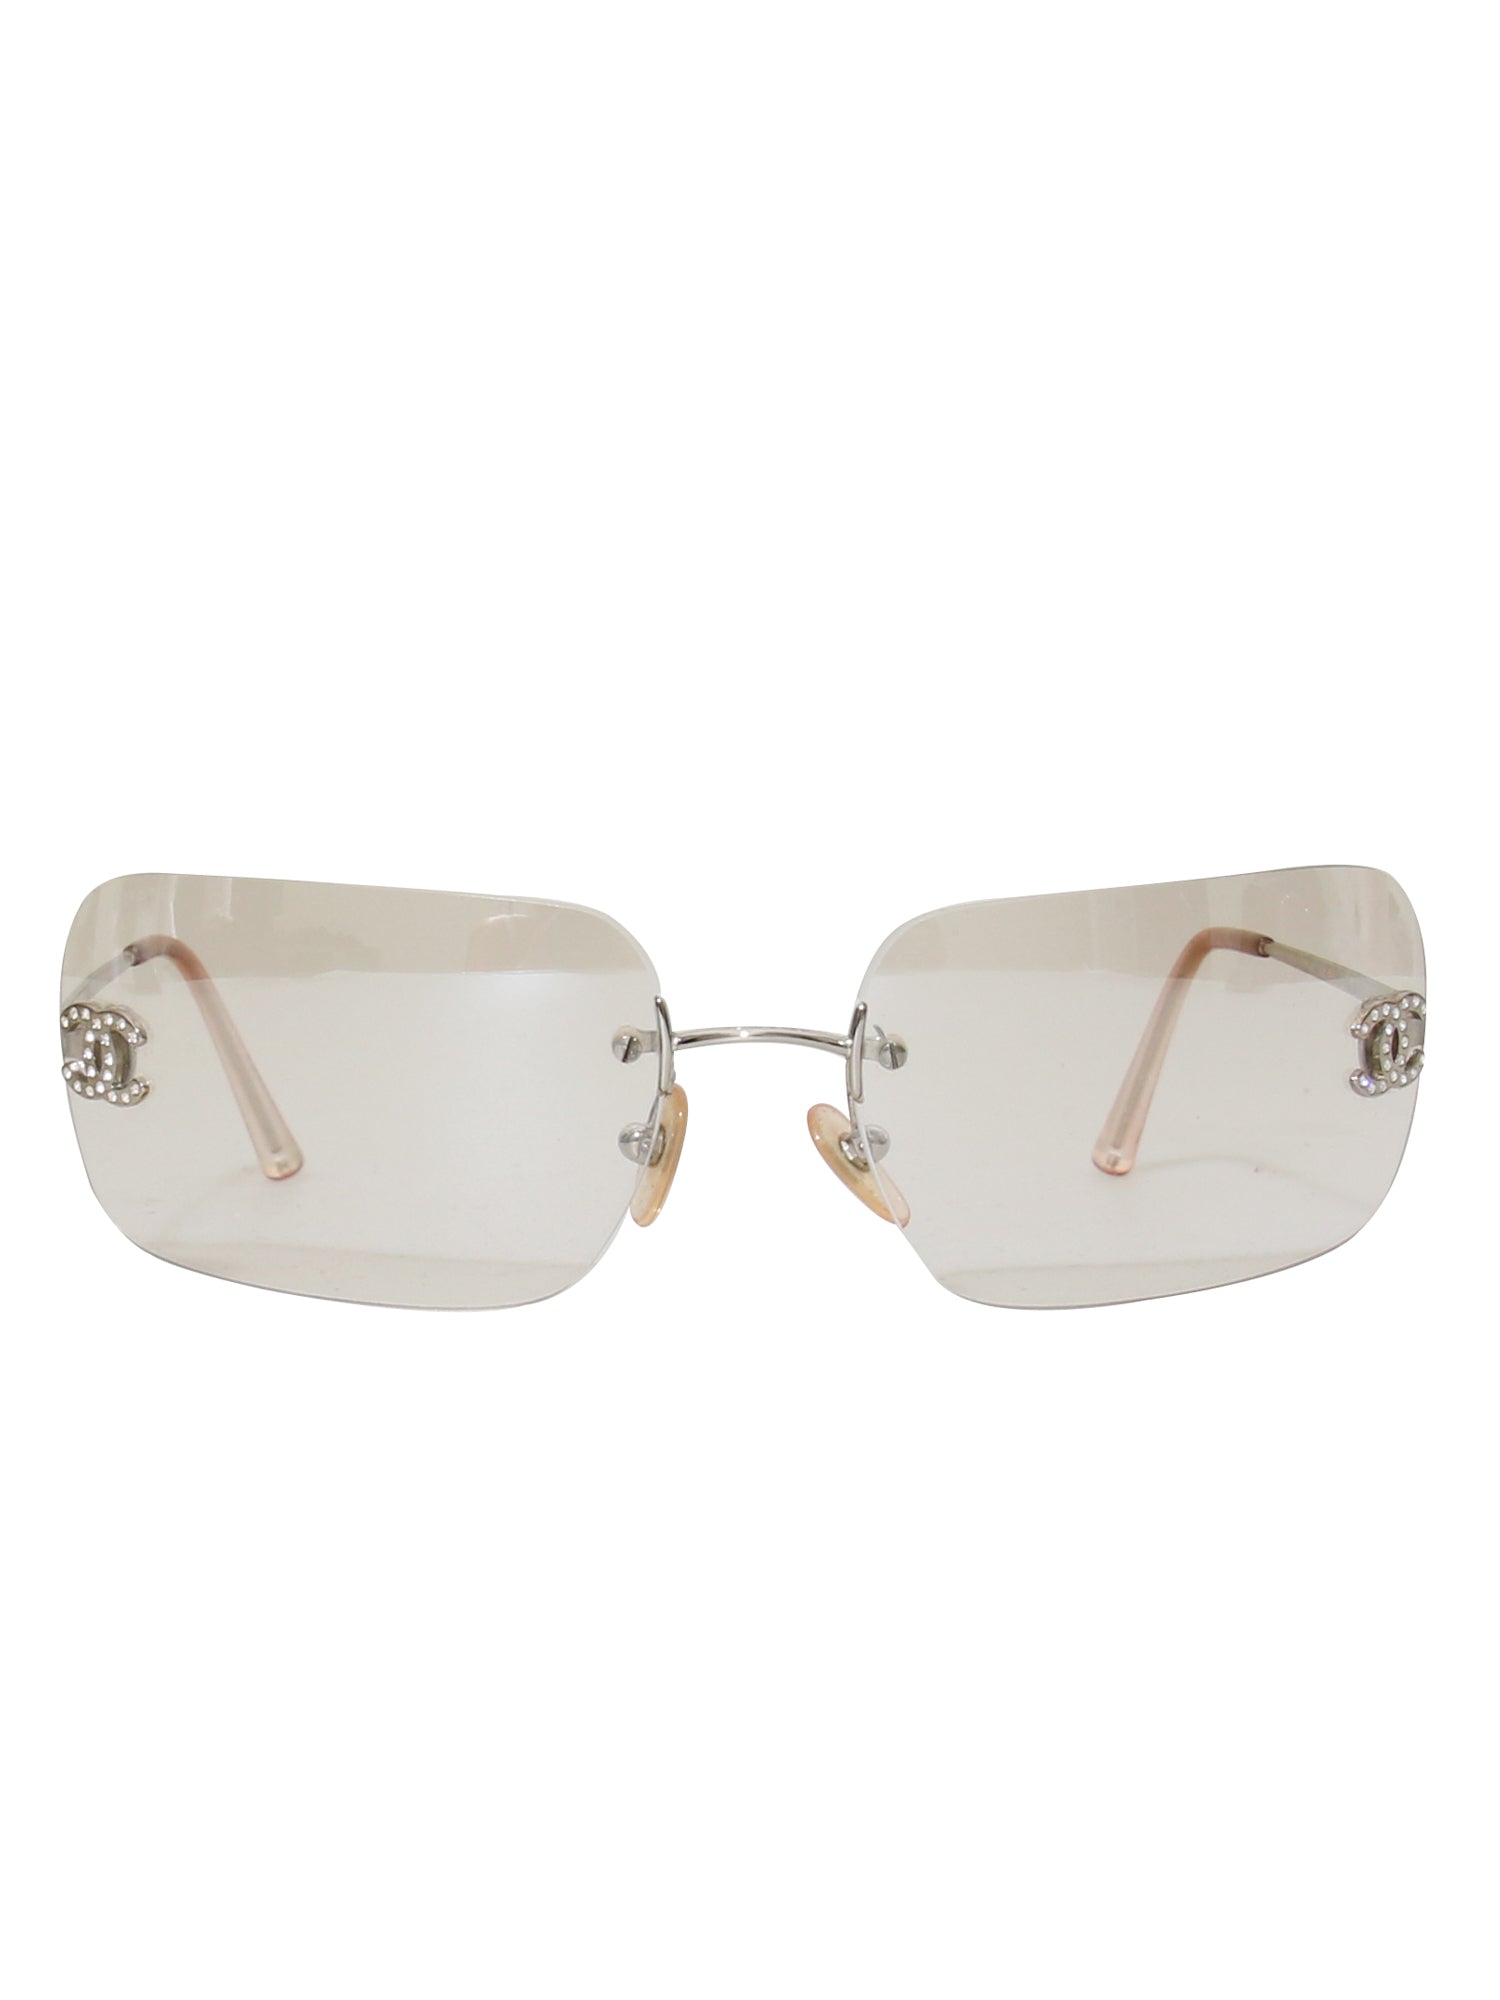 Chanel Vintage Orange Rimless Sunglasses – Dina C's Fab and Funky  Consignment Boutique